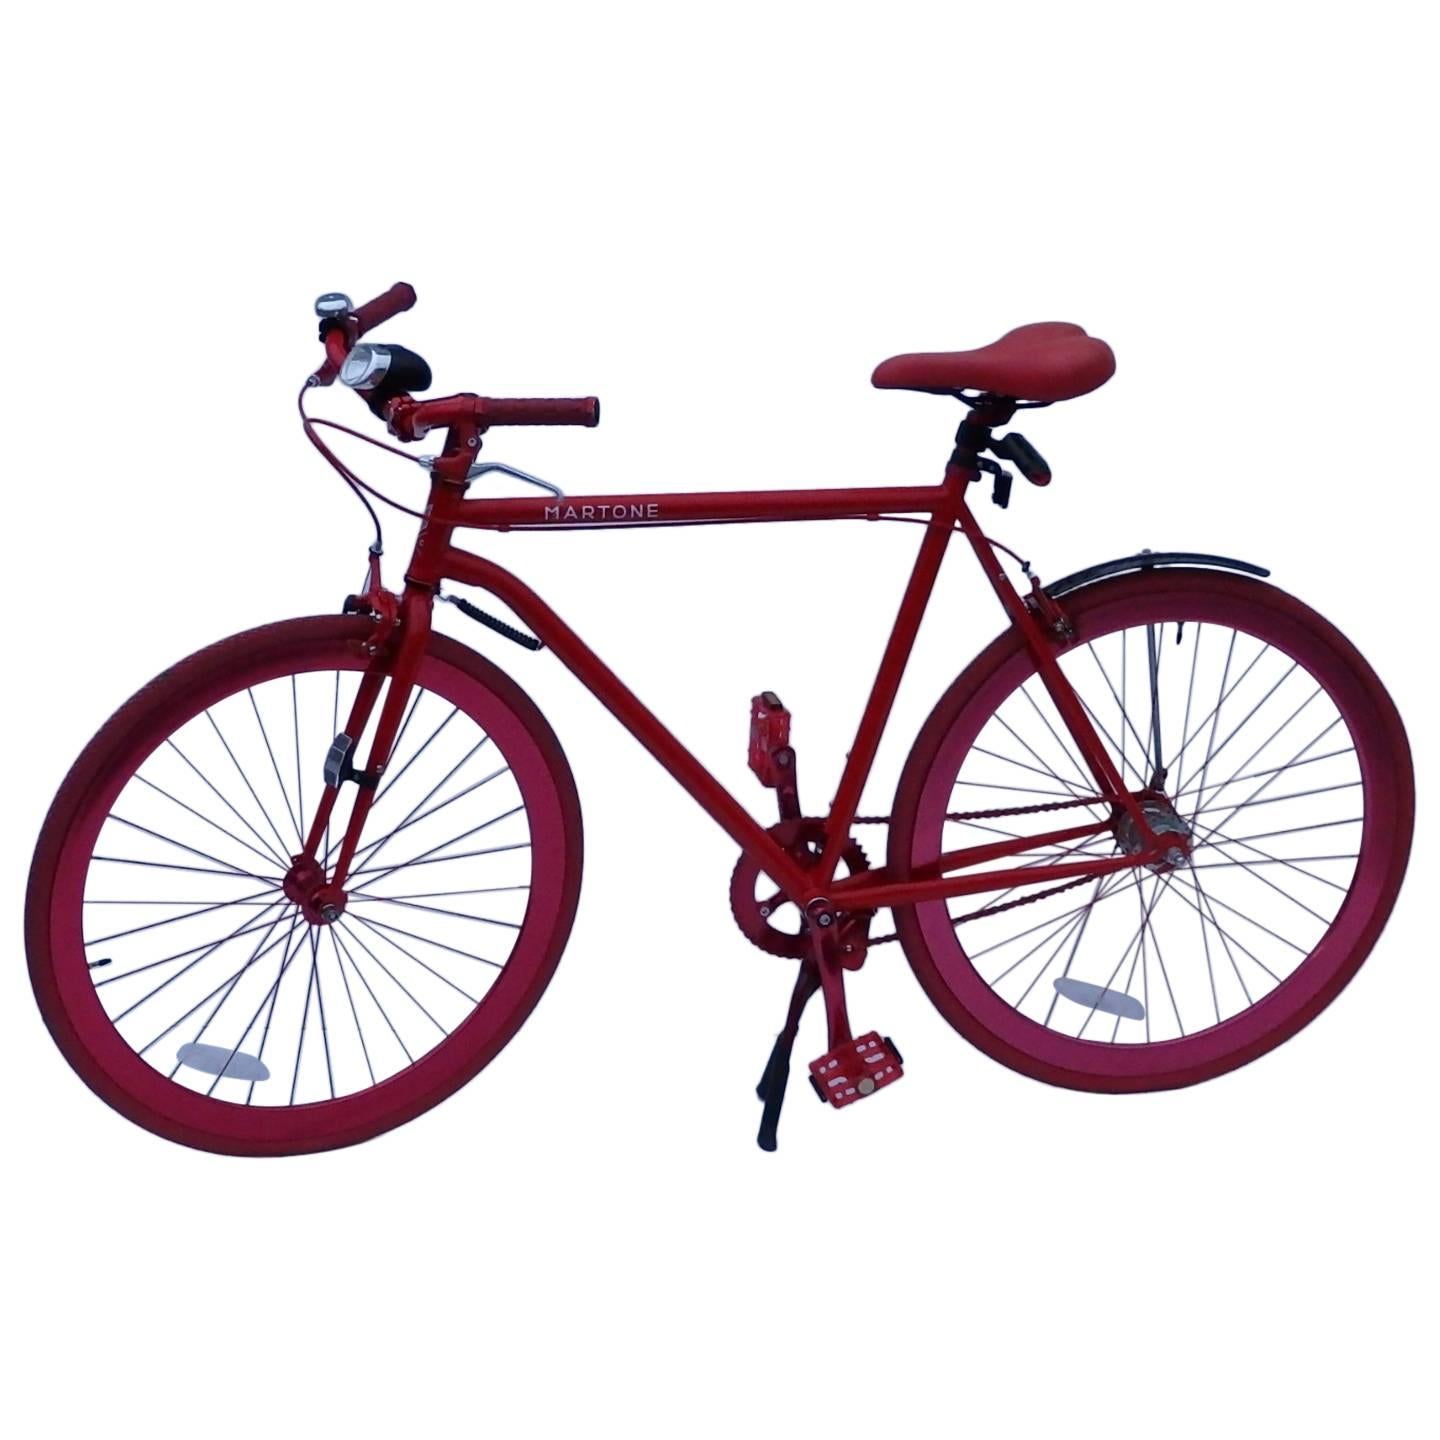 Martone Bicycles For Sale